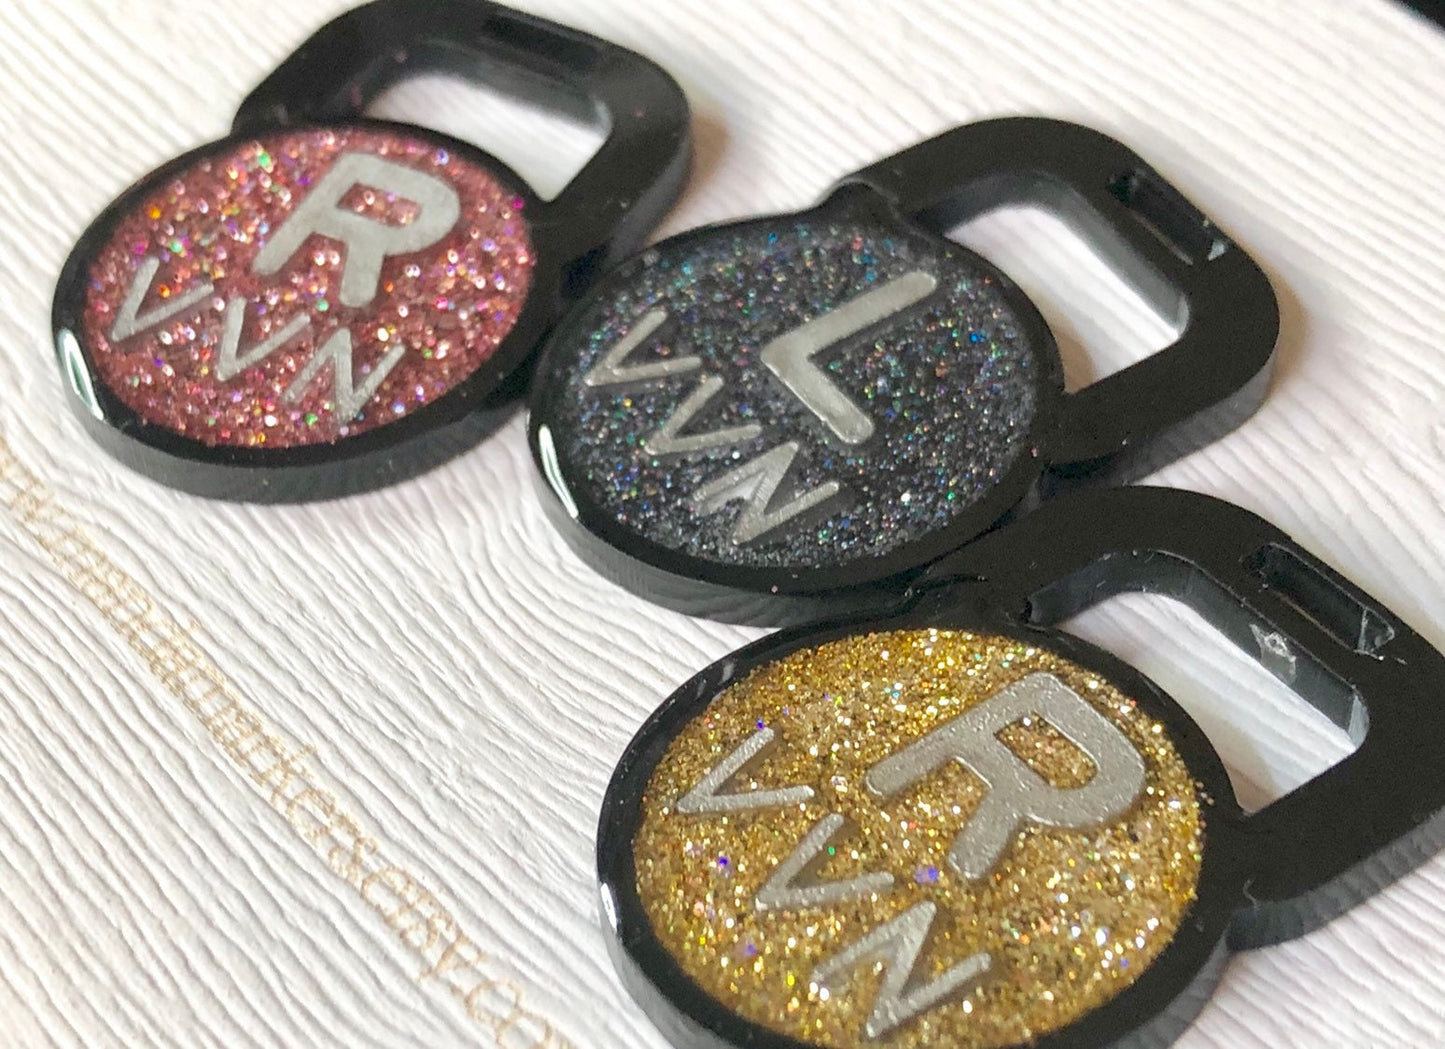 Kettlebell Xray Markers Customized with 2-3 Initials